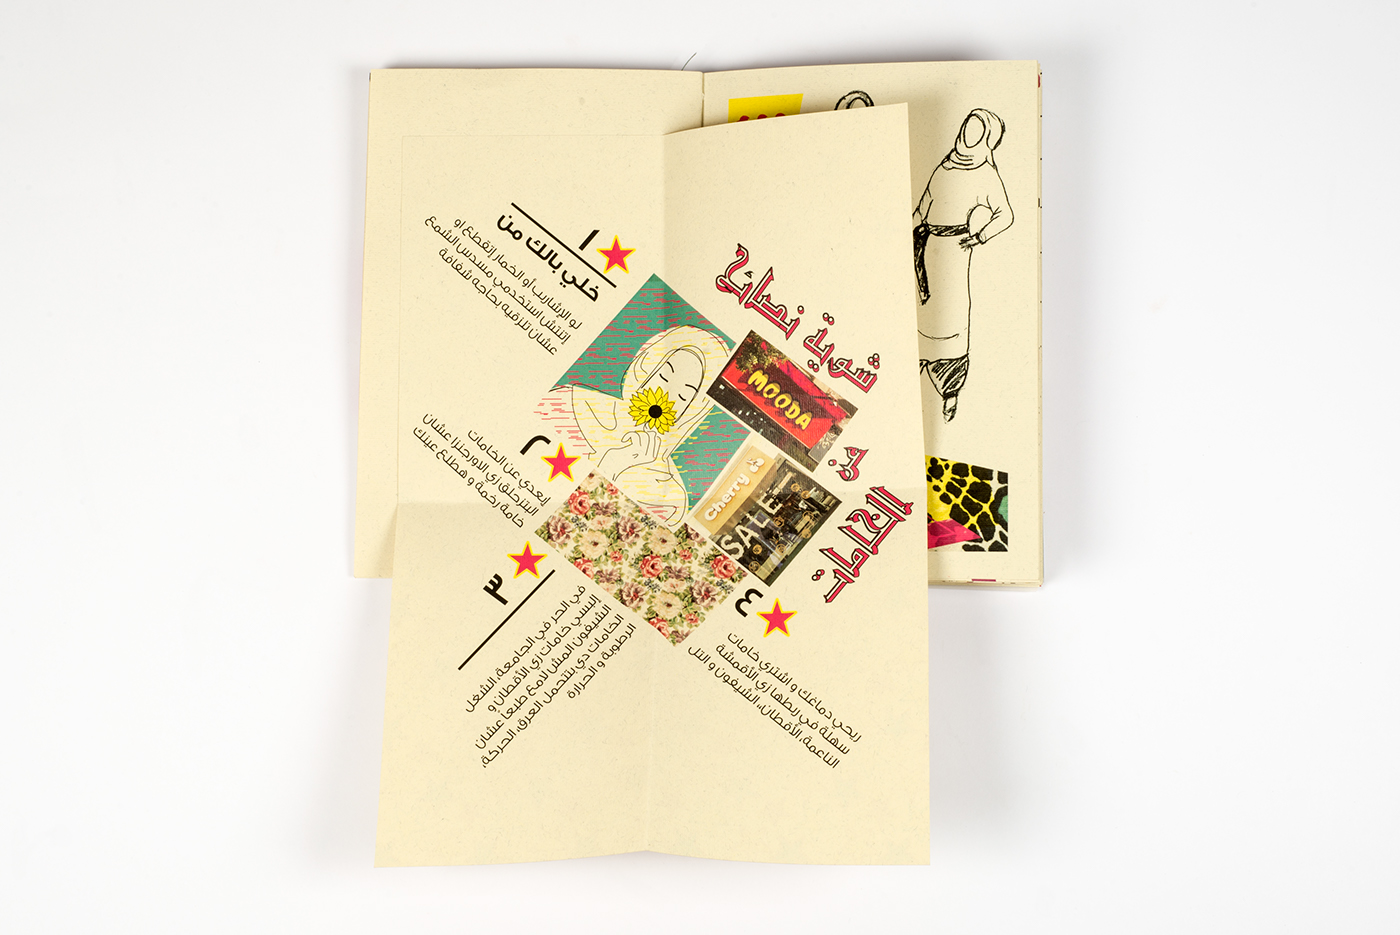 Book Binding editorial fashion tips guide book local brands  map design sign system editorial design  ILLUSTRATION 